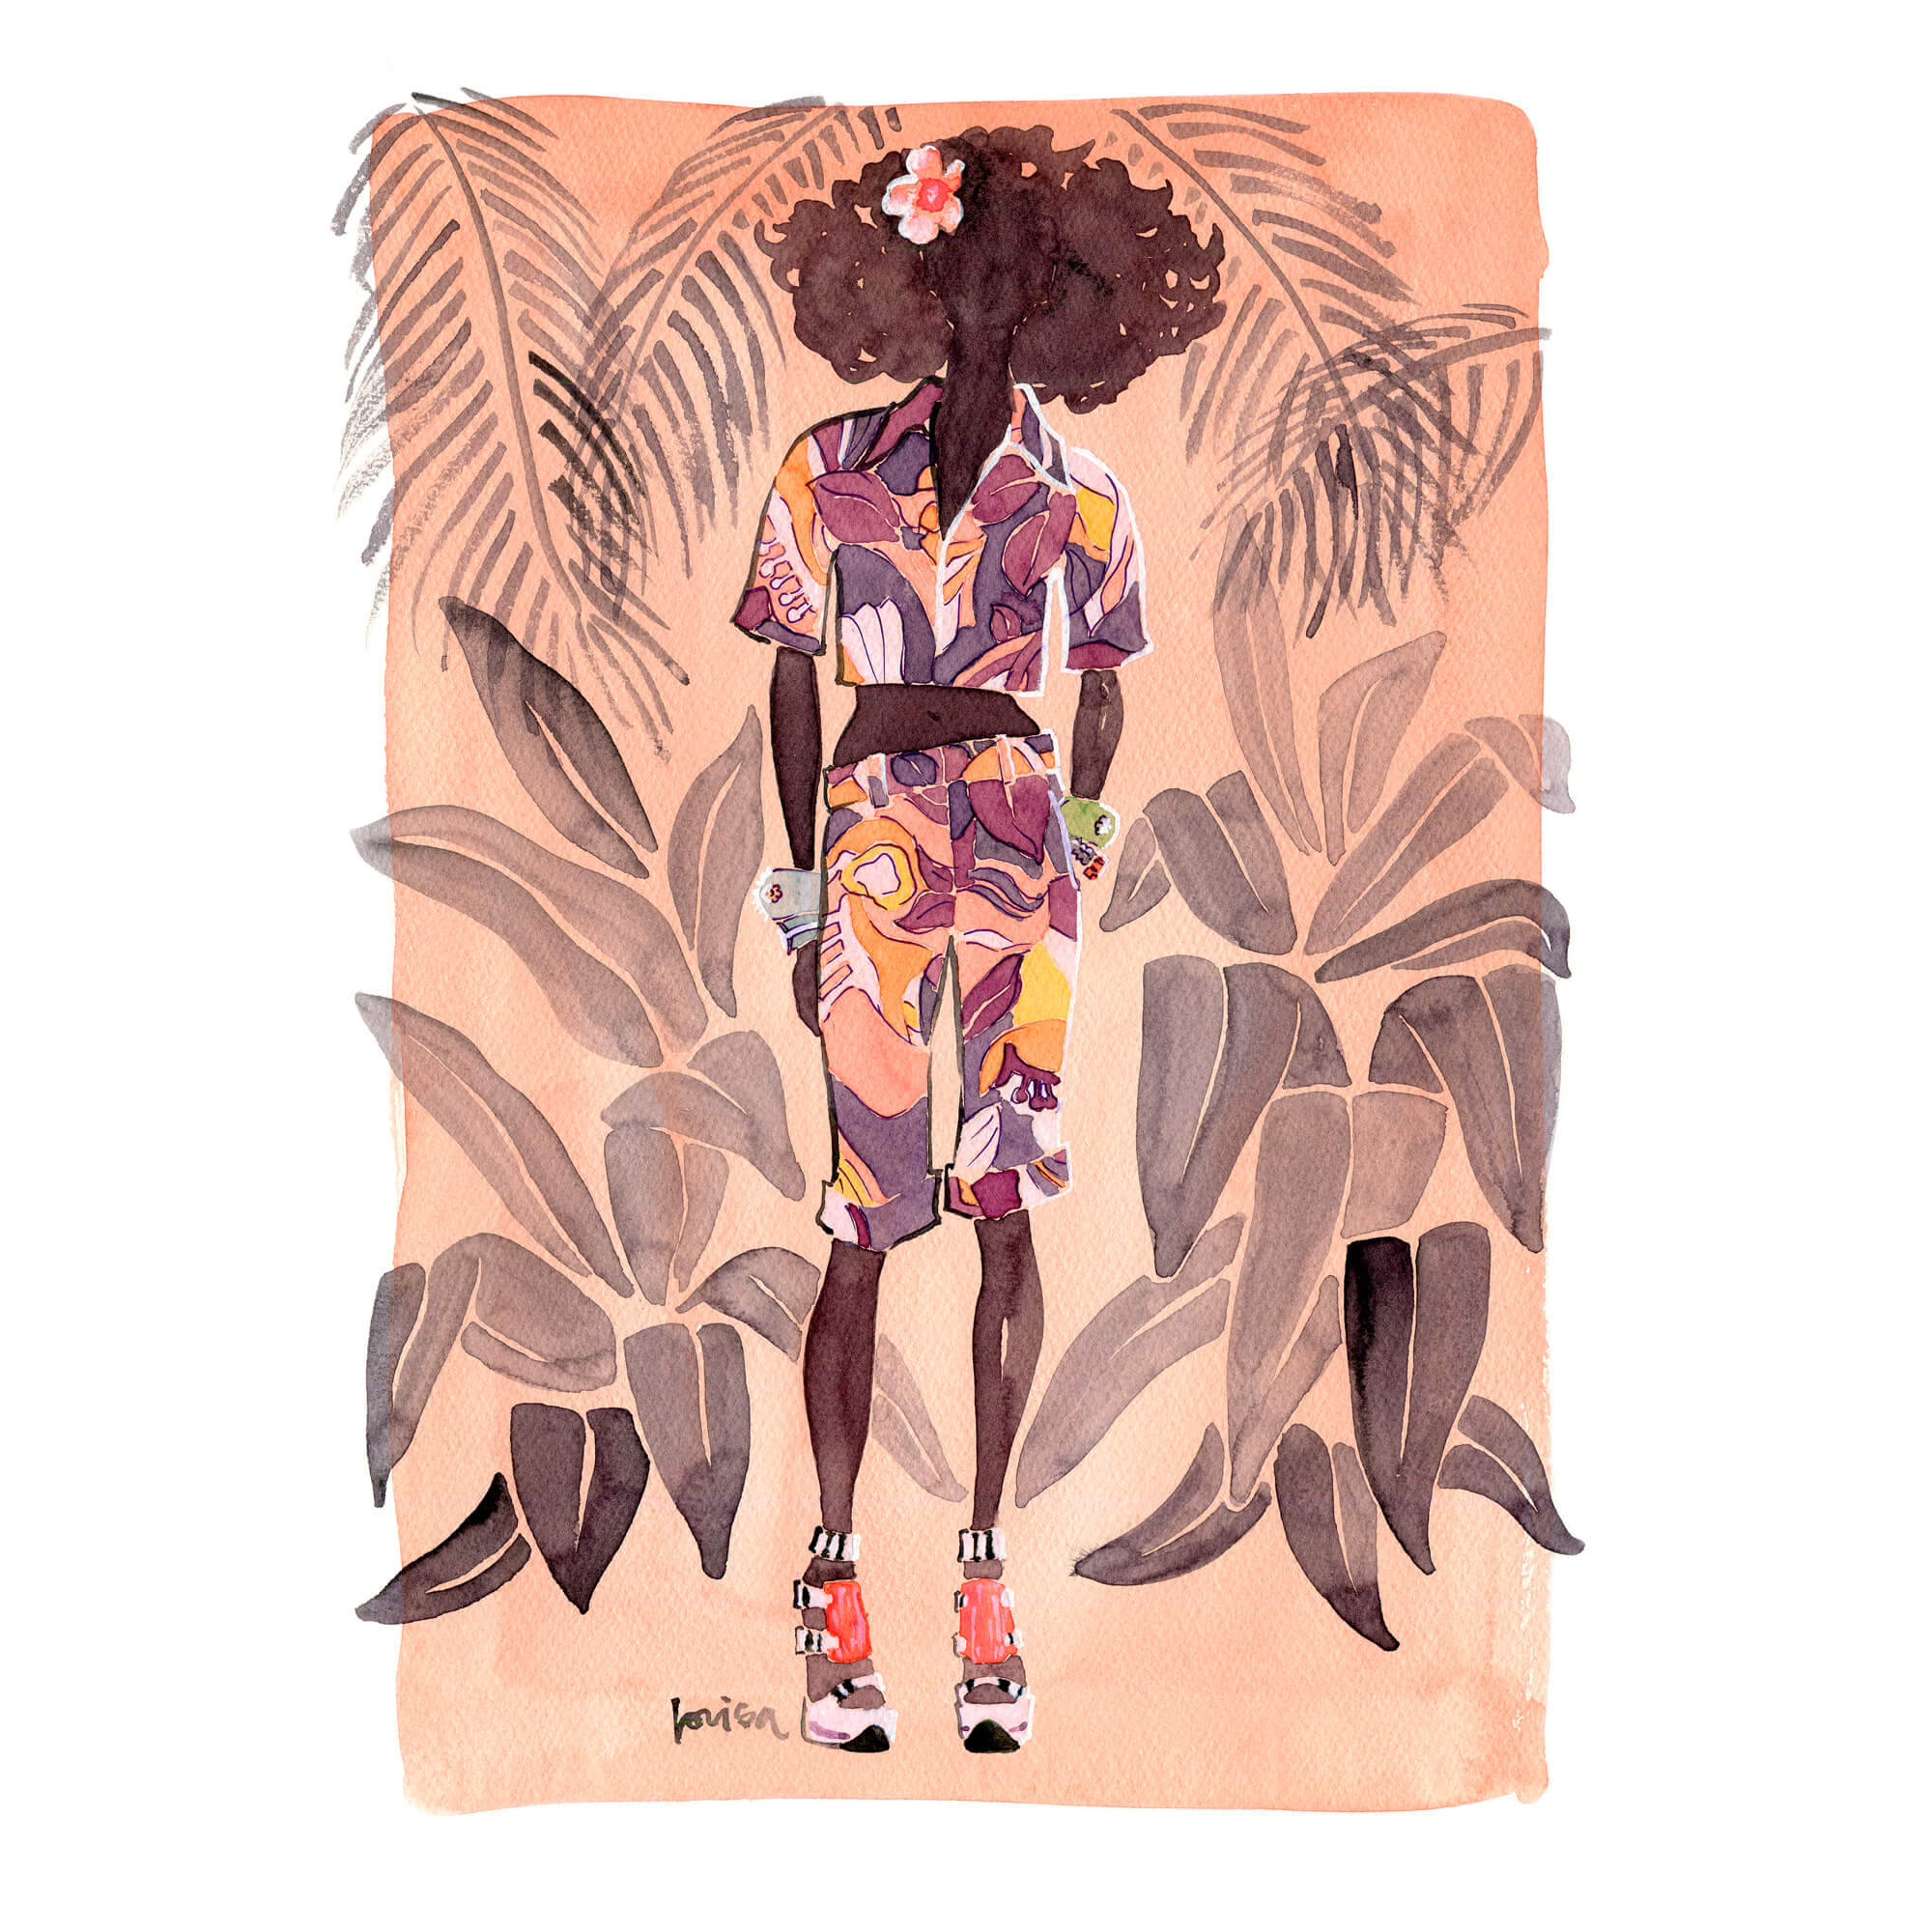 A paper giclée print of watercolor artwork featuring a woman wearing a retro attire and tropical background by Hawaii artist Lovisa Oliv